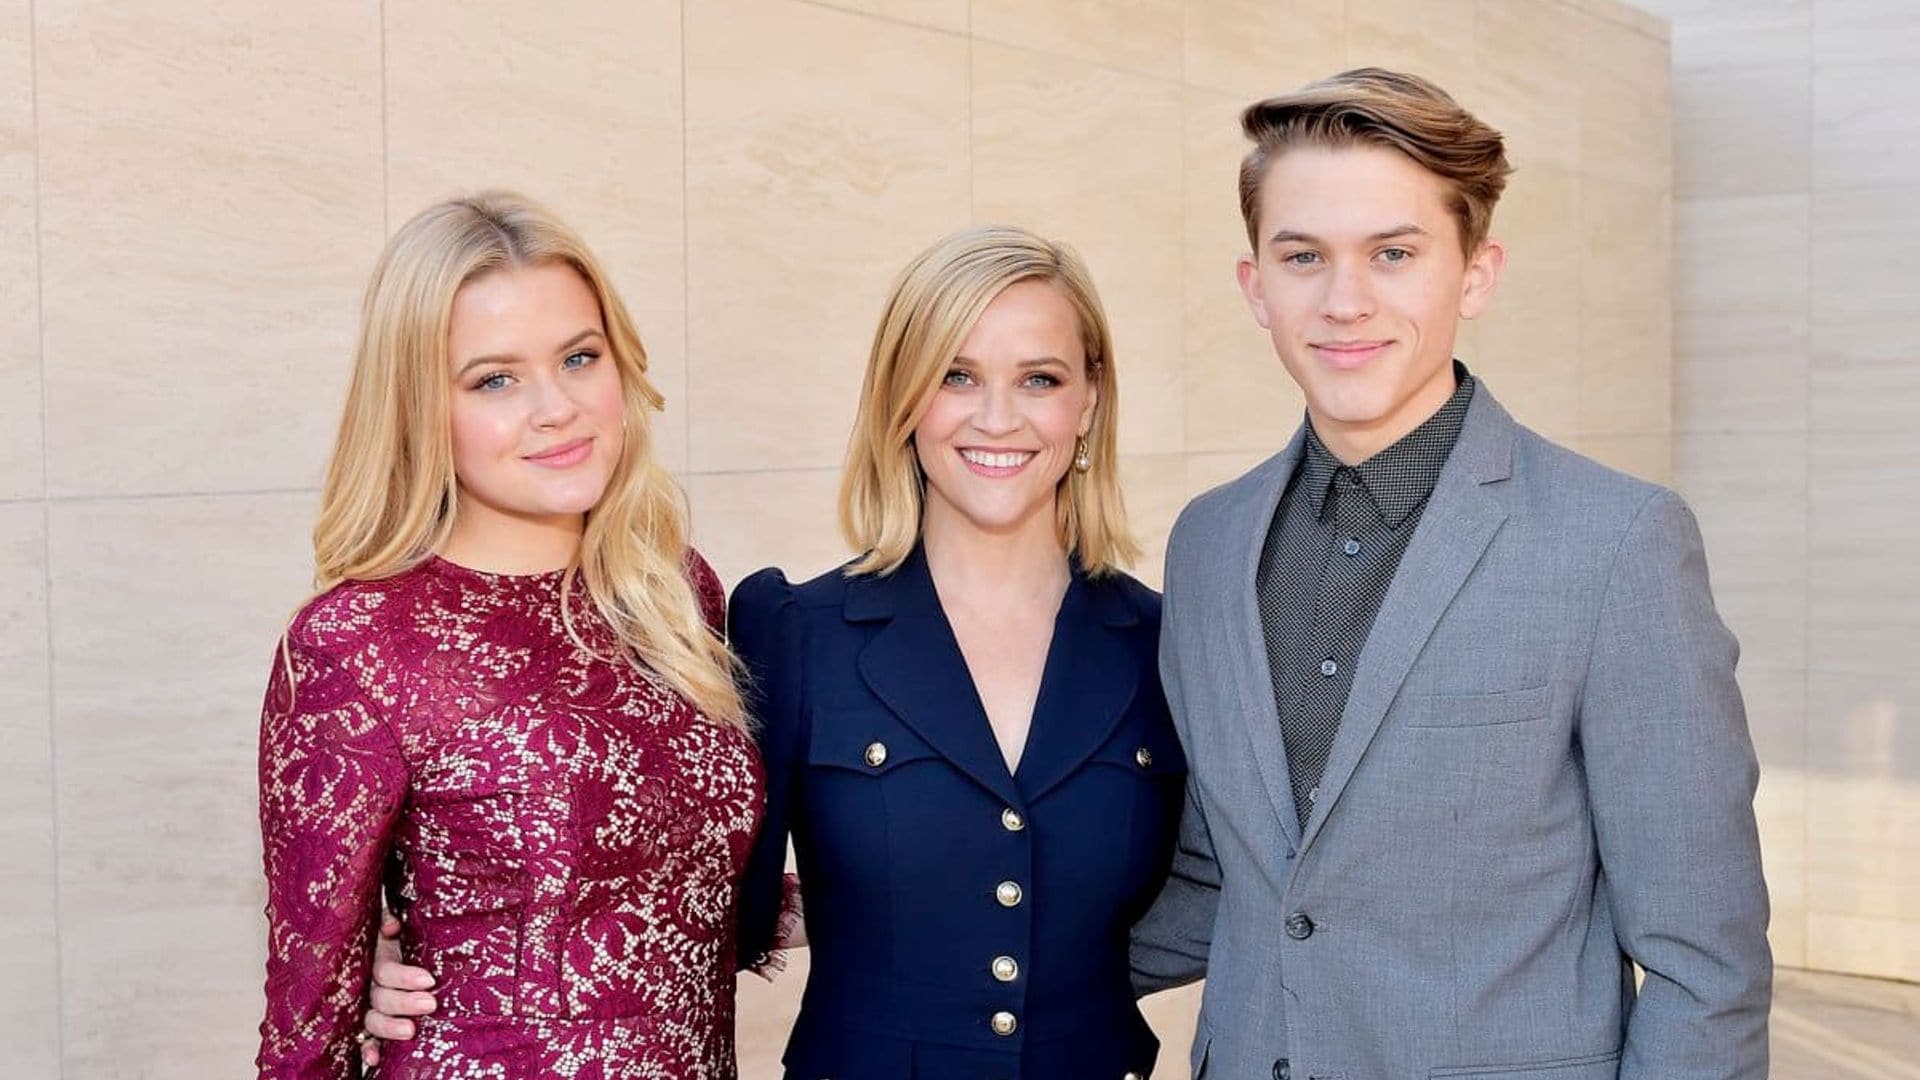 Reese Witherspoon’s kids are Beyoncé’s new star models